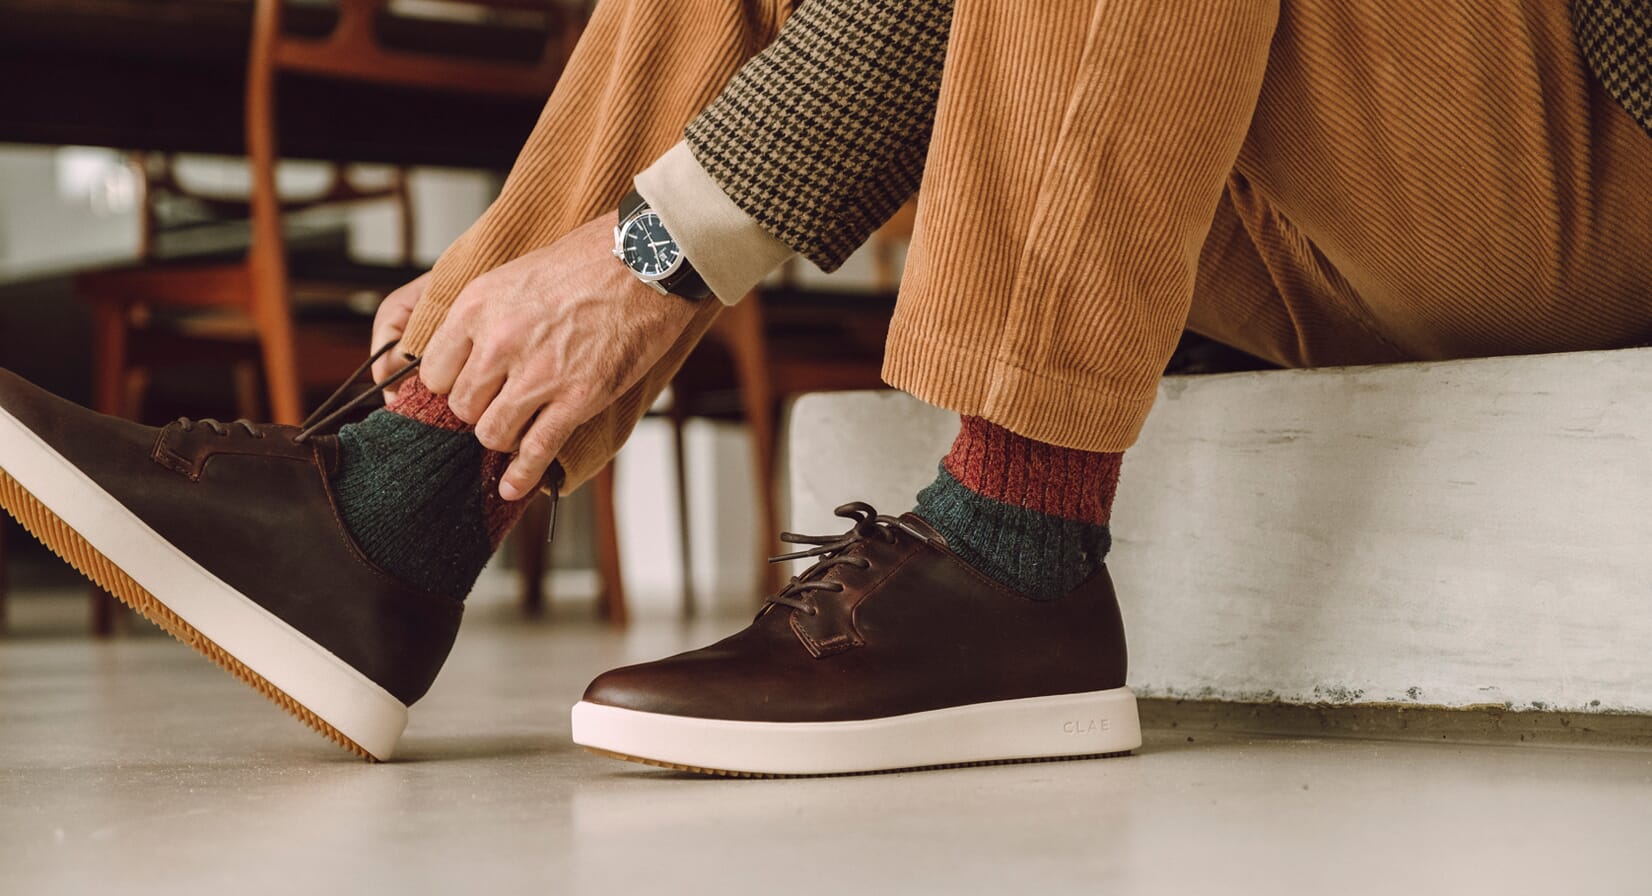 Everything you need to about CLAE shoes | OPUMO Magazine